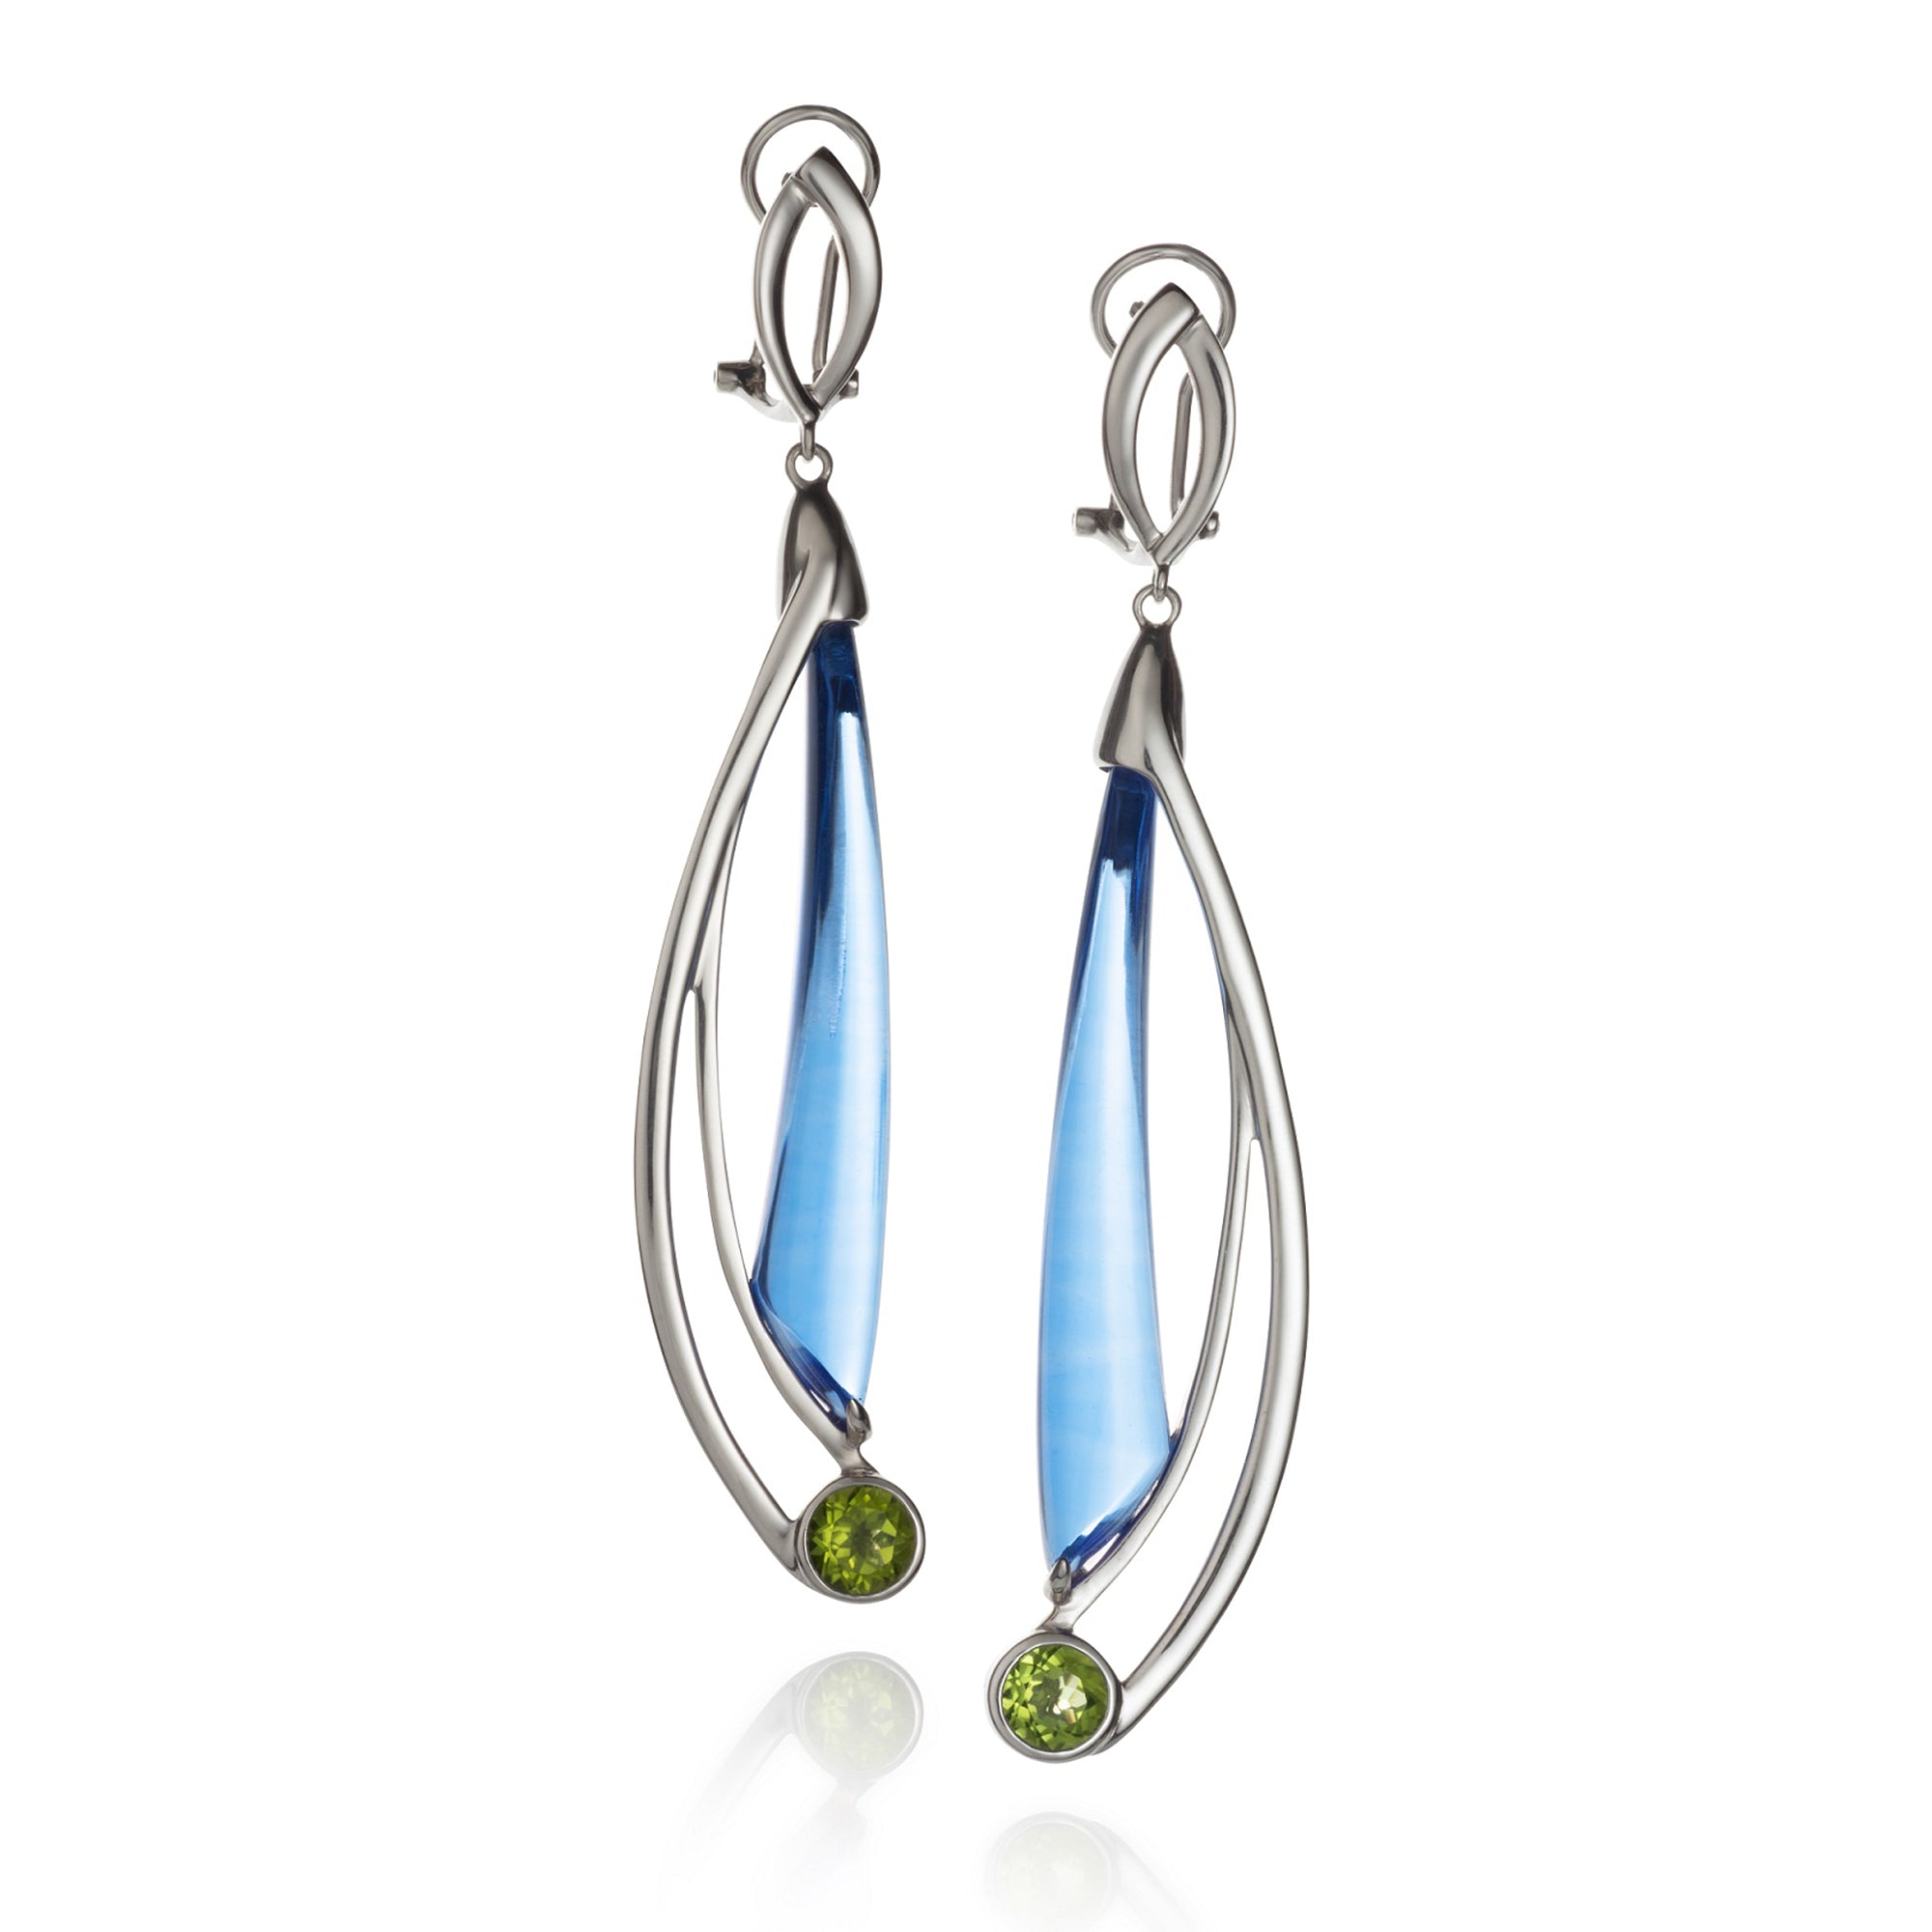 Blue Quartz and Peridot Comet Earrings by Martha Seely - Talisman Collection Fine Jewelers